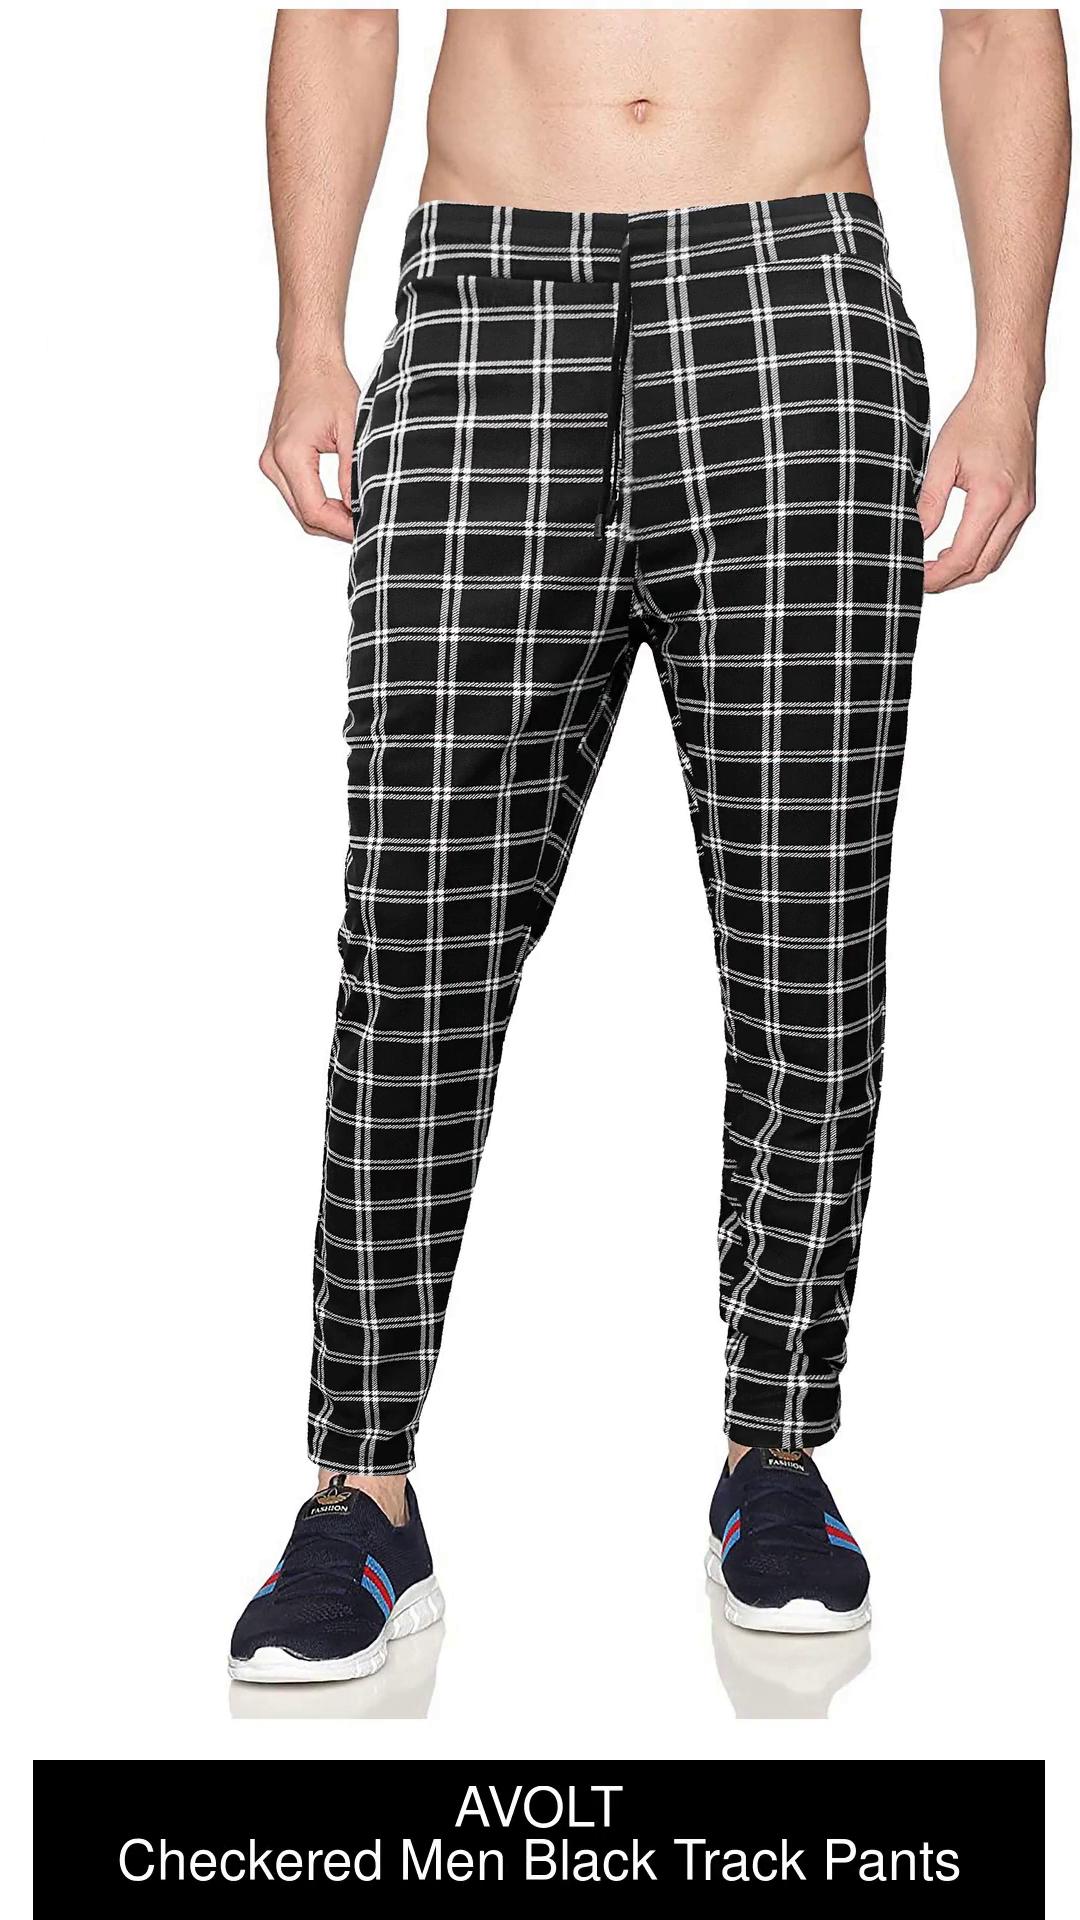 Handloom cotton black and white check pants  Rescue  Fabnest